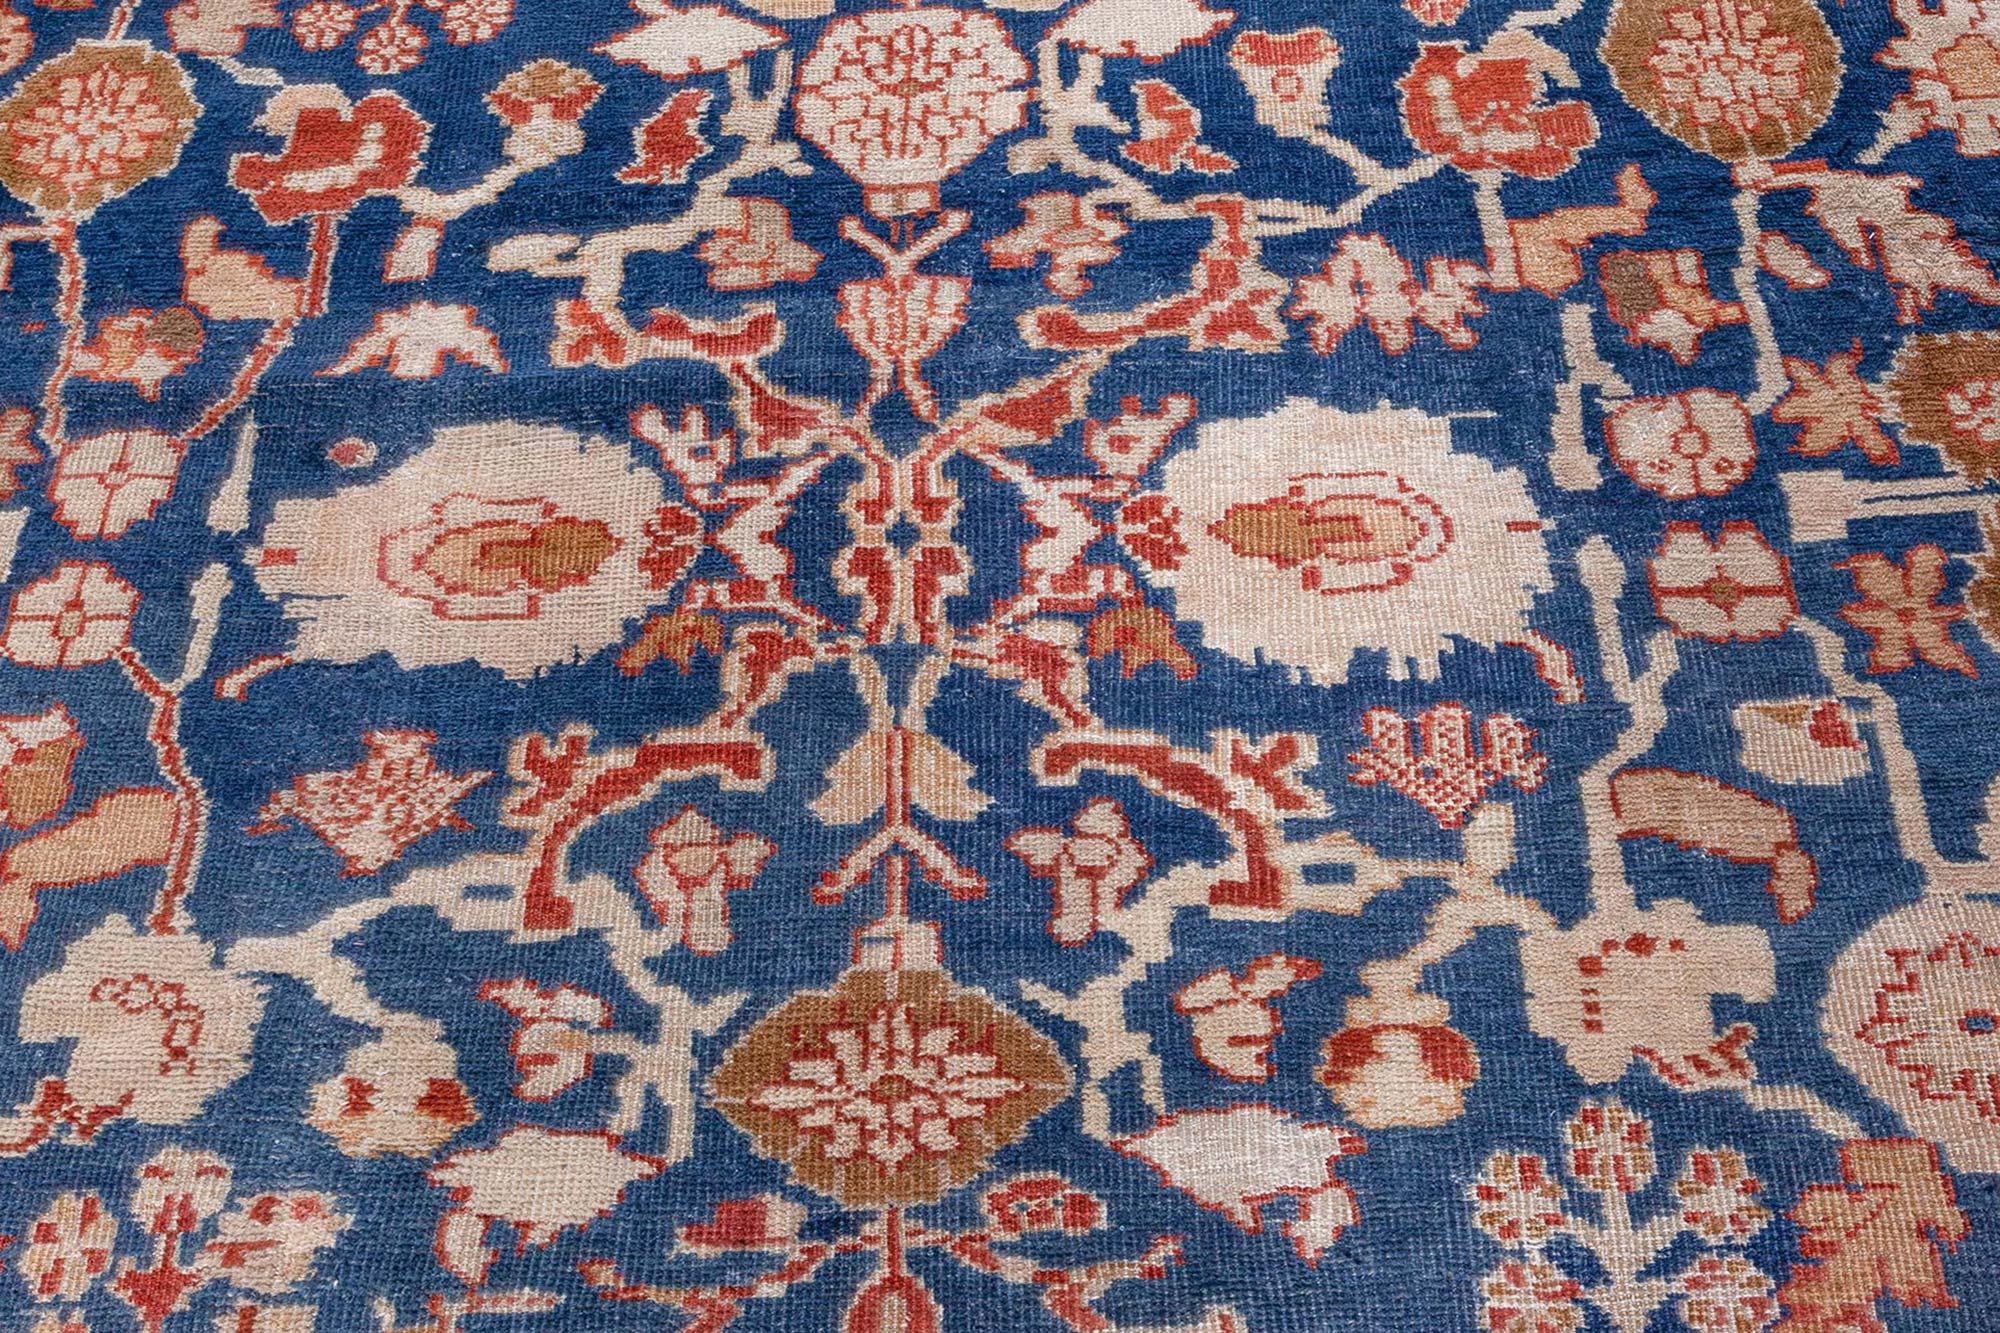 Early 20th Century Persian Sultanabad Rug
Size: 13'8